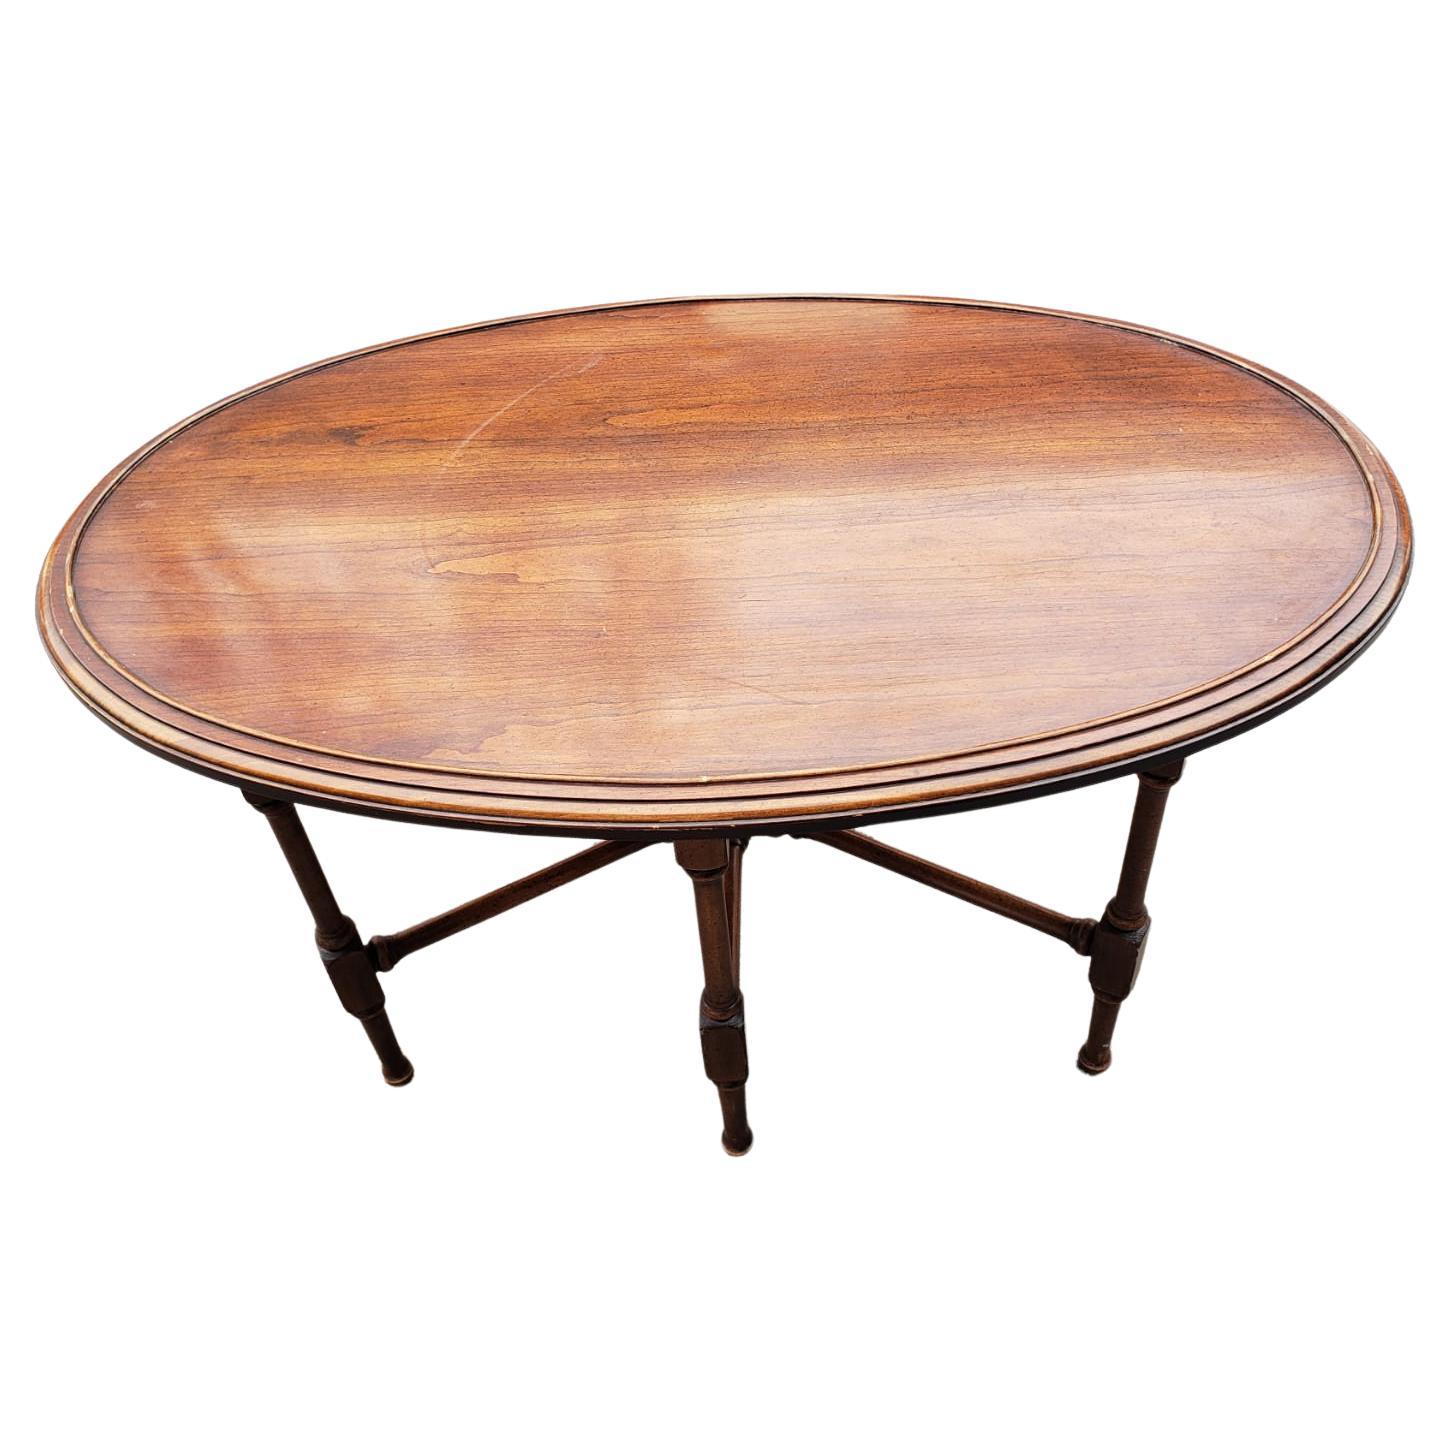 American Brandt Furniture Faux Bamboo Mahogany Oval Coffee Table, circa 1960s